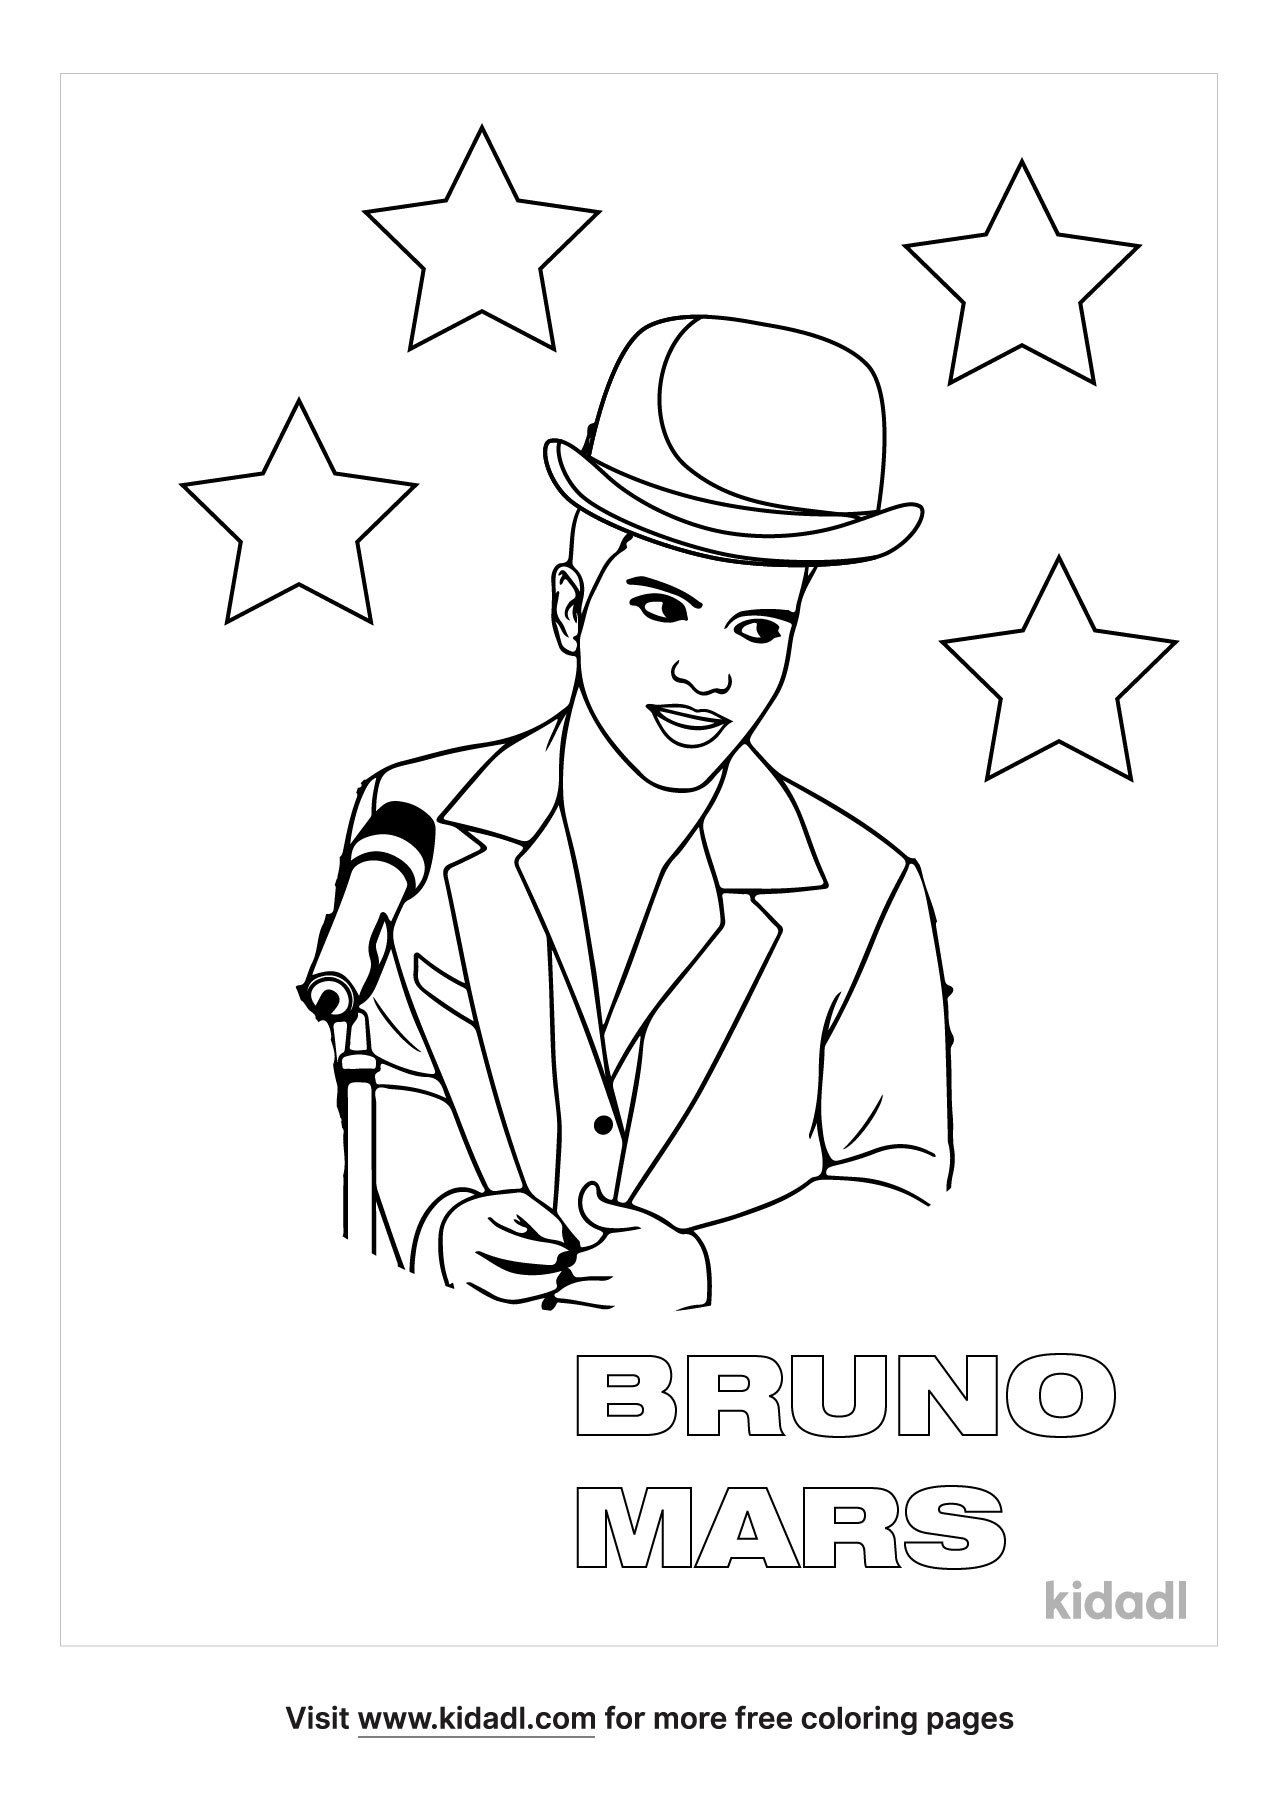 Bruno Mars Coloring Pages | Free People Coloring Pages | Kidadl